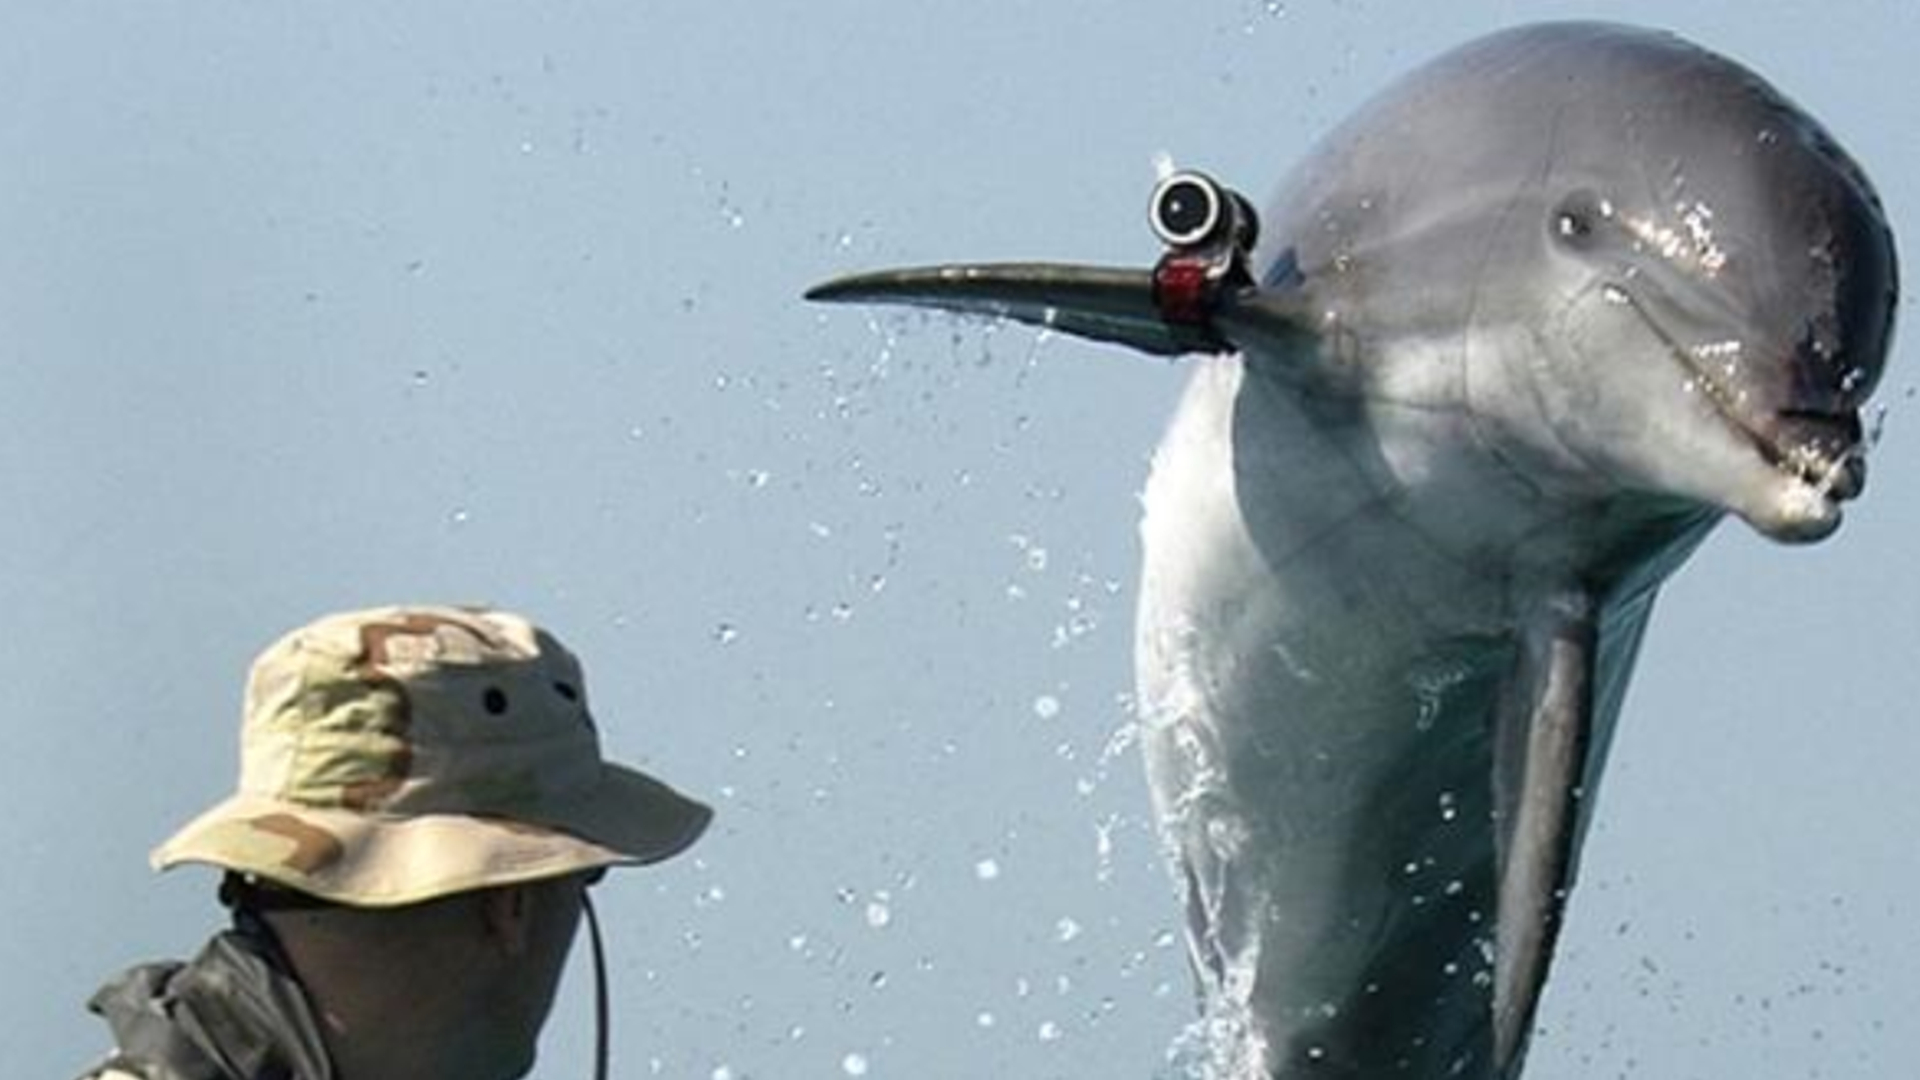 10 craziest secret military projects, Iran trained dolphins to kill people, Soviet Union researched laser tanks